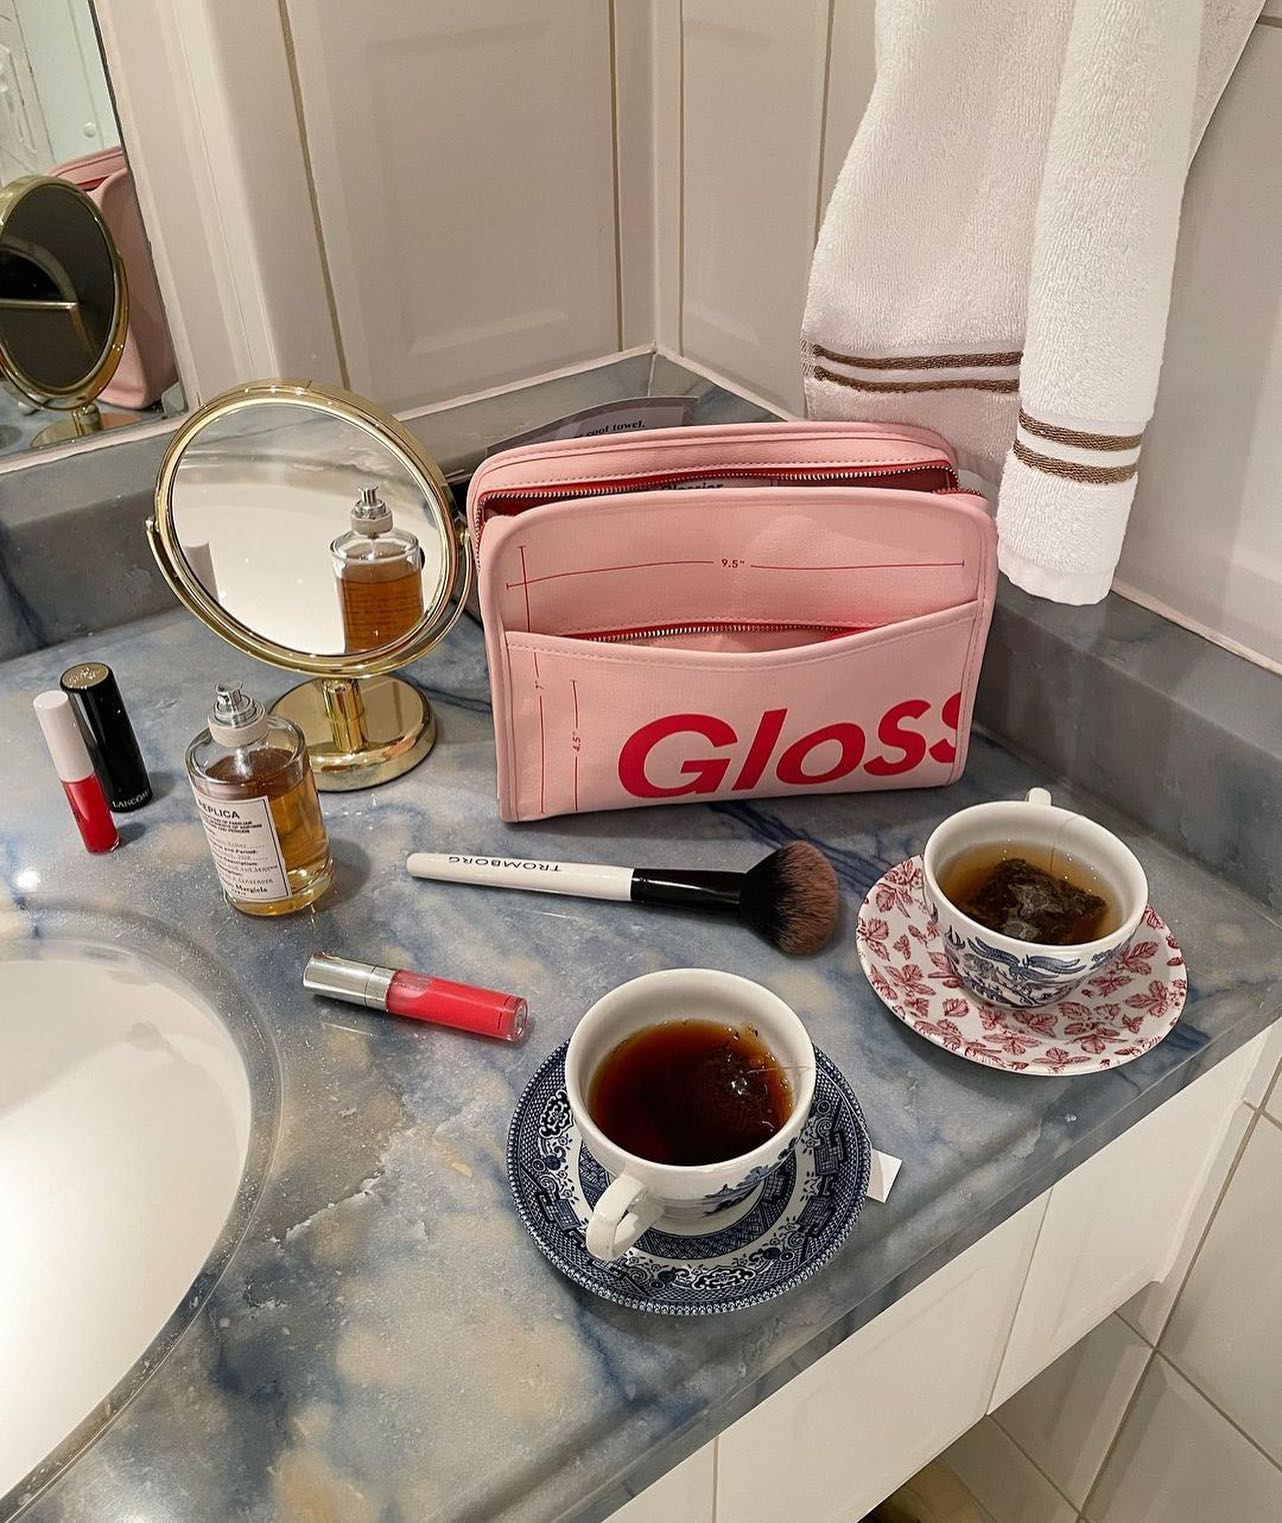 A Glossier make up bag sits on a bathroom countertop alongside two cups of tea and other Glossier products.